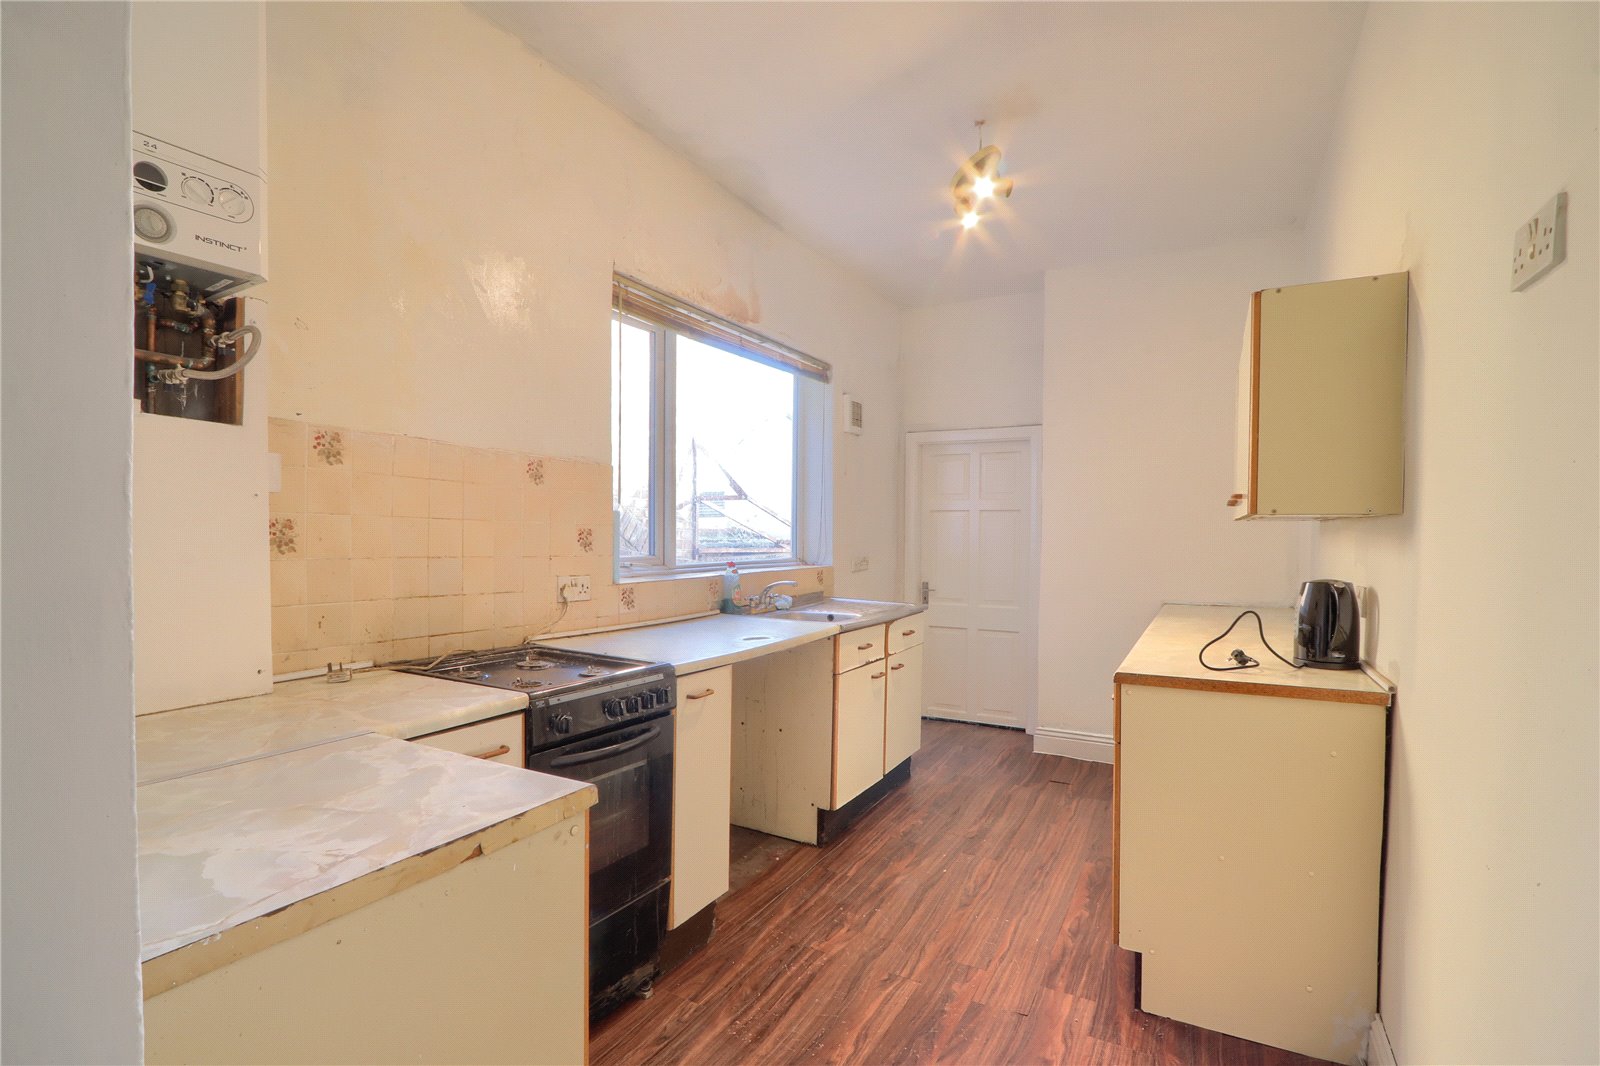 2 bed house for sale in Londonderry Road, Stockton-on-Tees  - Property Image 4